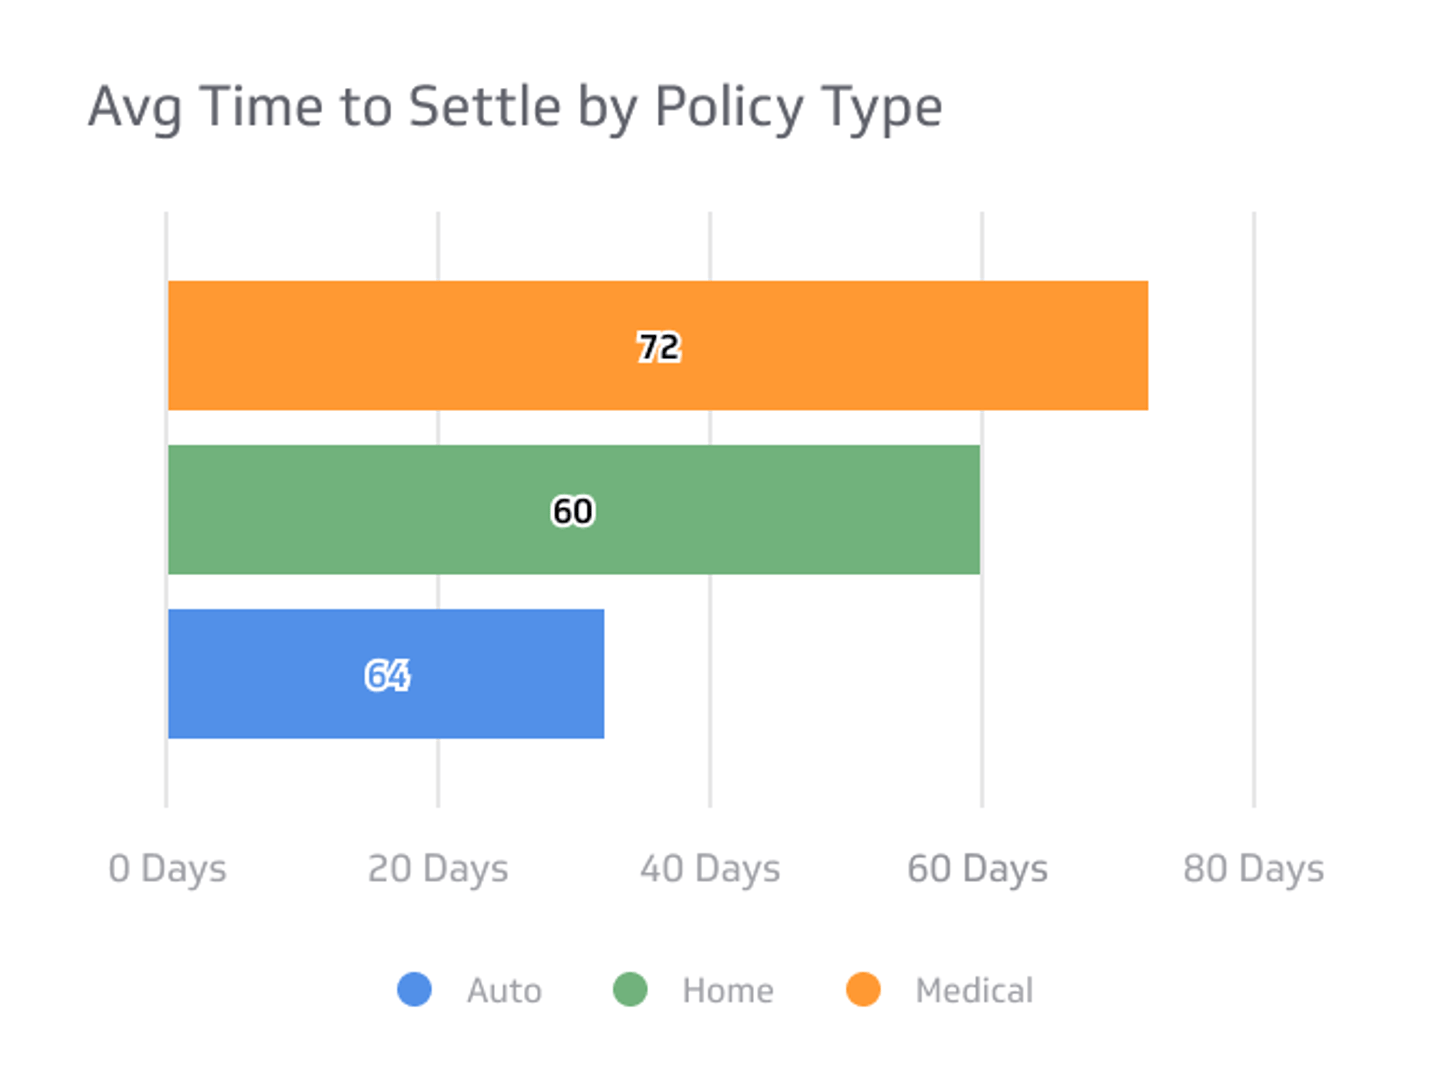 Related KPI Examples - Average Time to Settle a Claim Metric